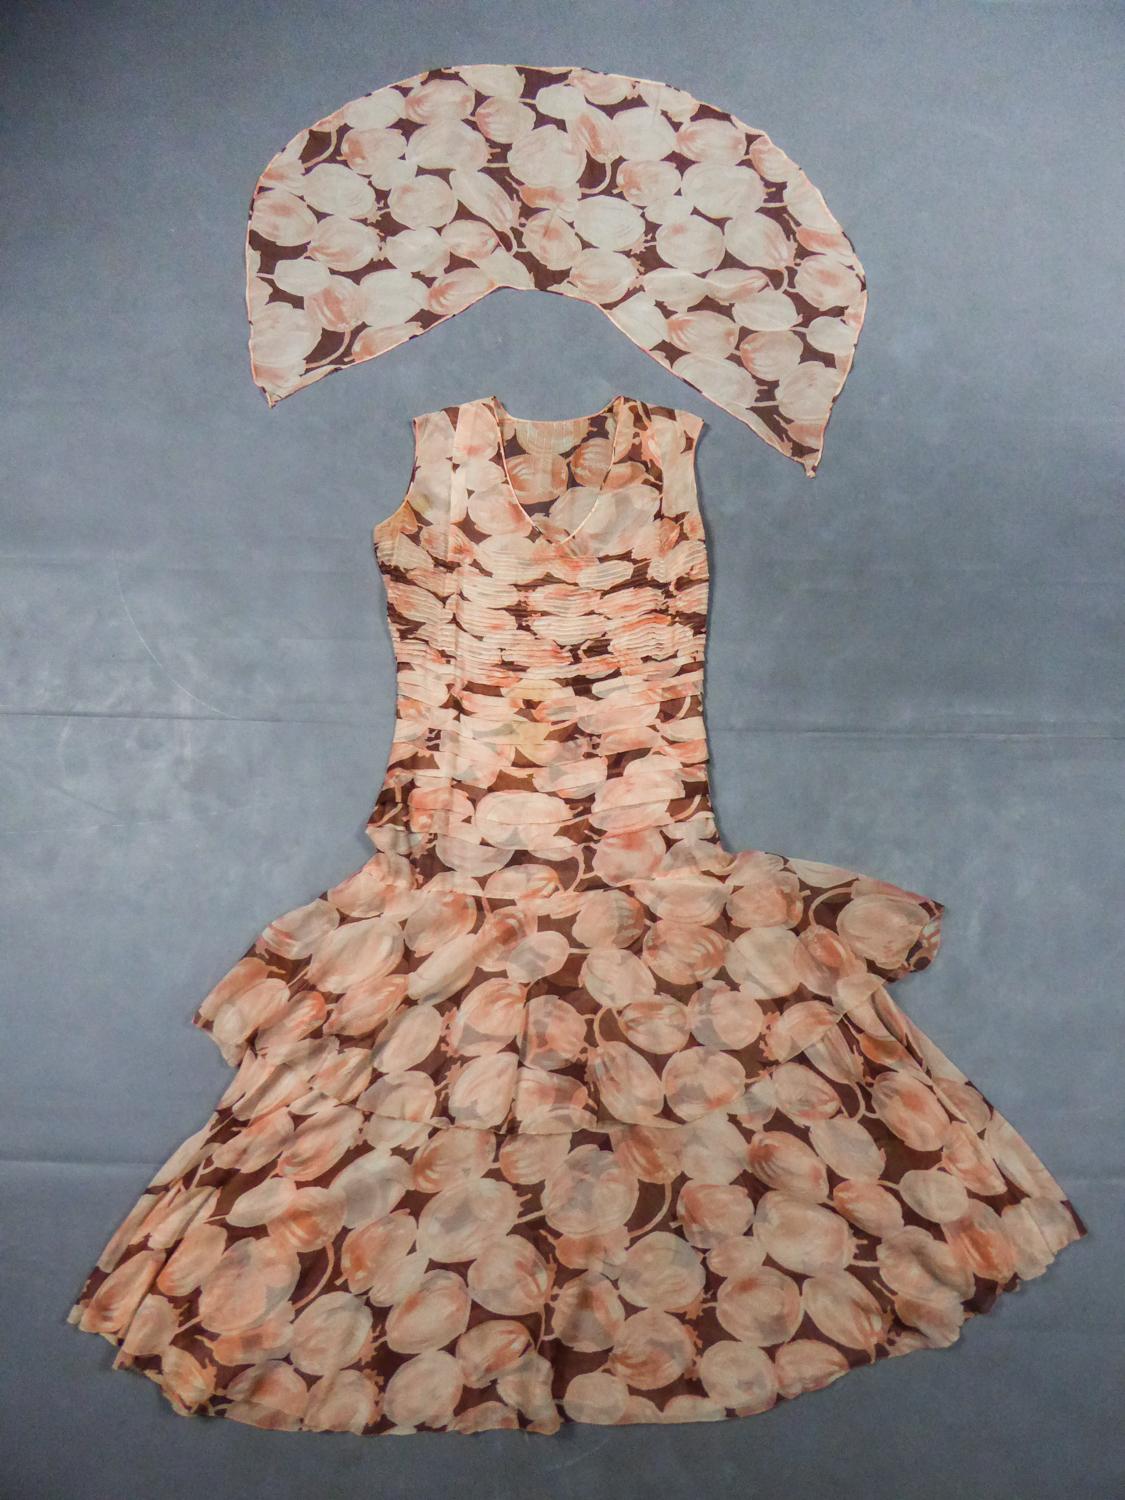 Circa 1930/1940
France

An Anonymous Haute Couture shawl and dress in silk crepe printed voile with fruit in shades of pink, orange and brown dating from the years 1930/1940. Tubular sleeveless cut typical of the 1930s with a bias work in the